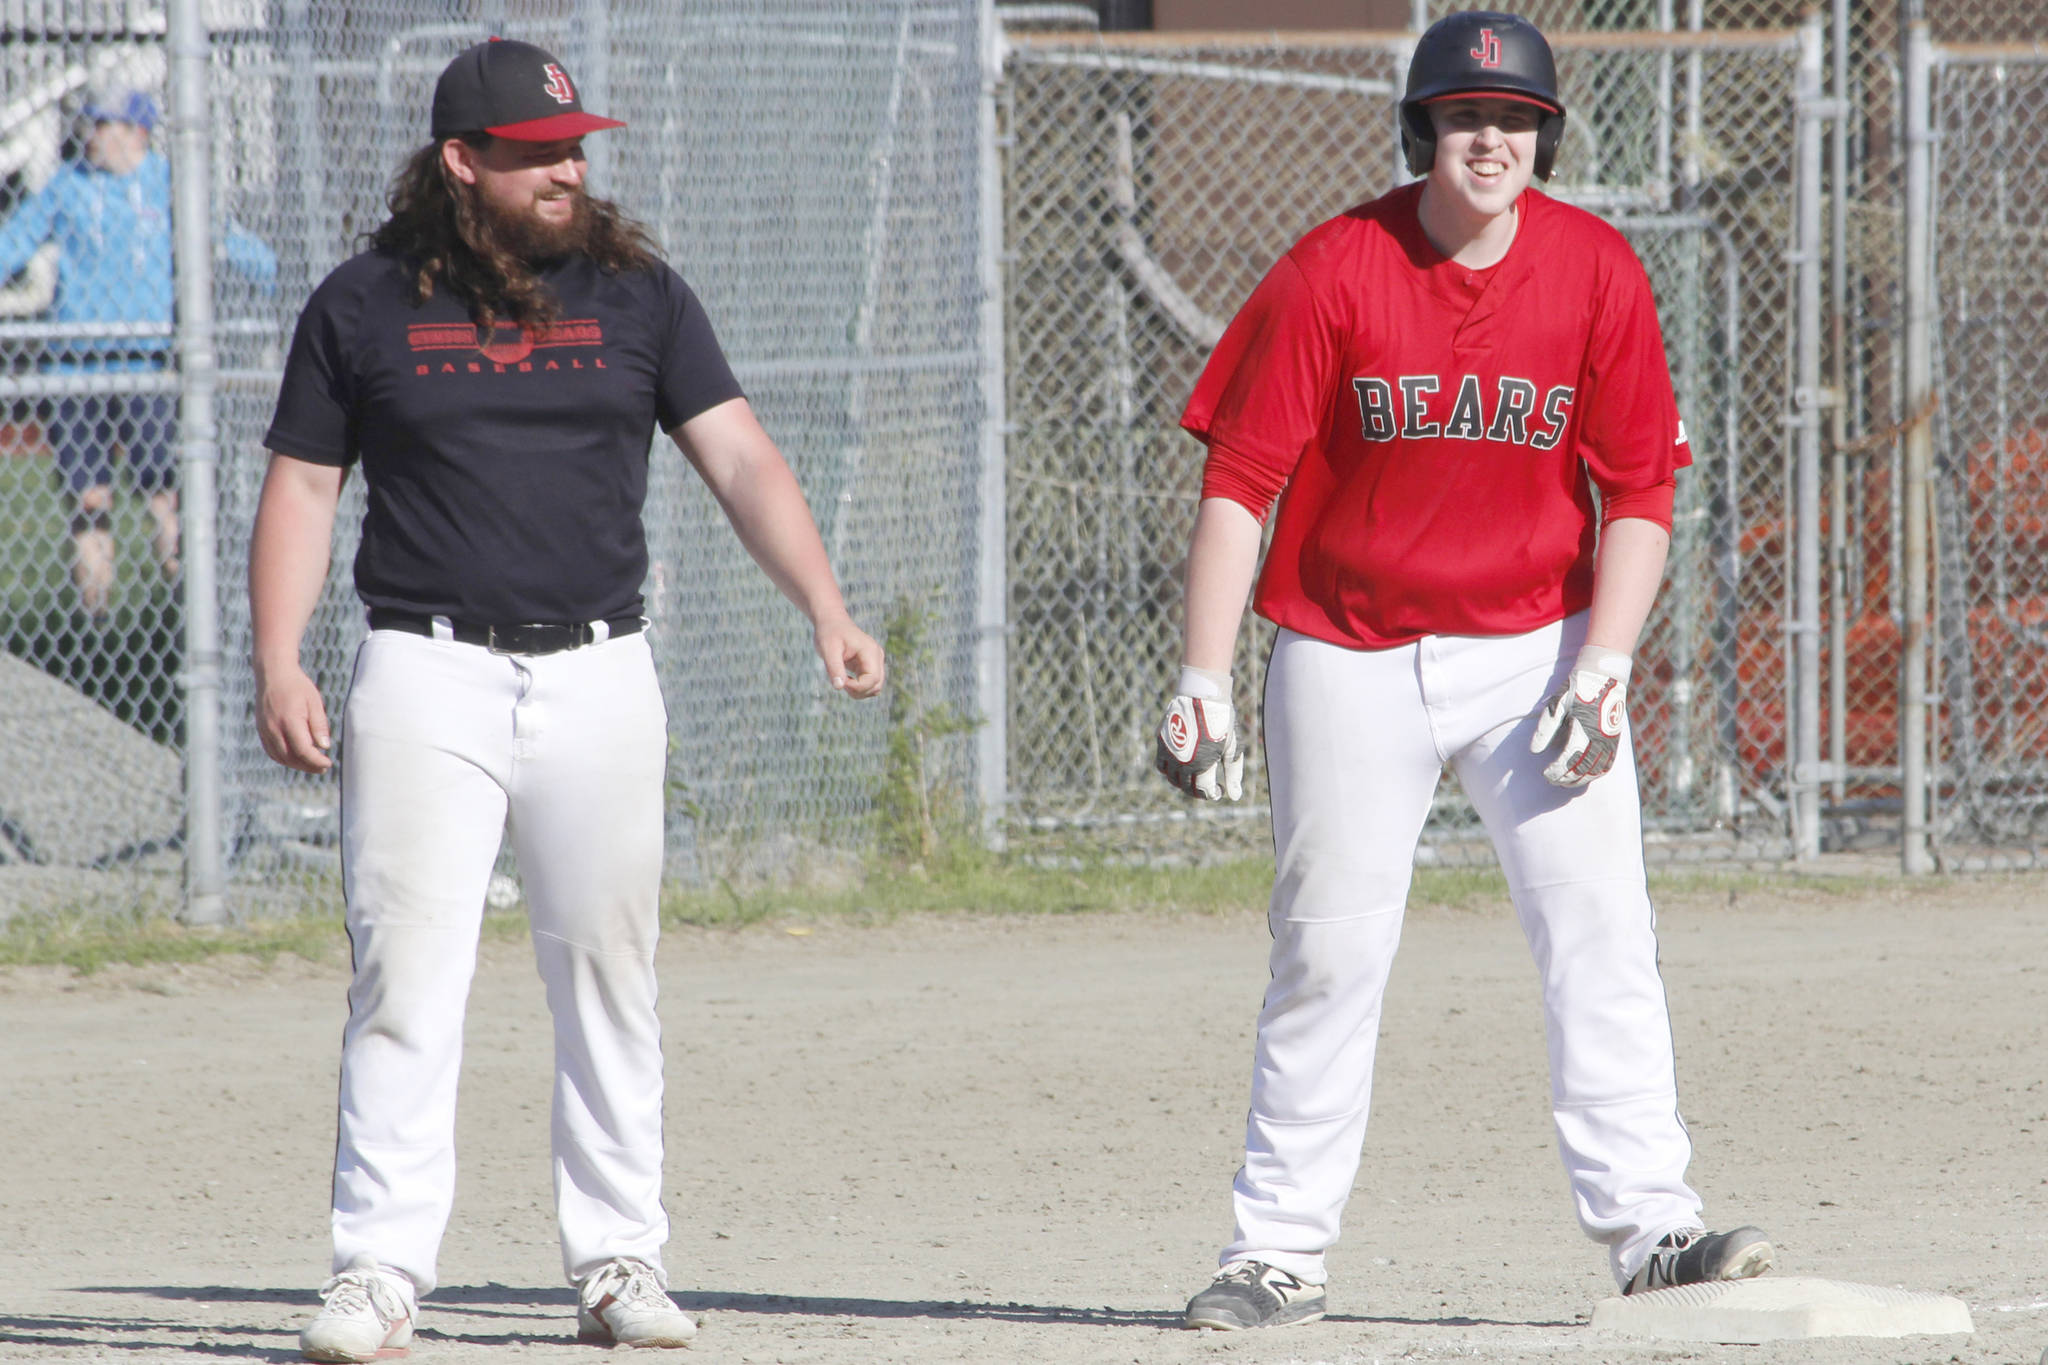 Juneau-Douglas High School: Yadaa.at Kale player Christian Ludeman gets a fist bump from coach Chris Dillon after advancing to third on a single and an error during the Region V title game against Ketchikan on Saturday, May 25, 2019. (Alex McCarthy | Juneau Empire)